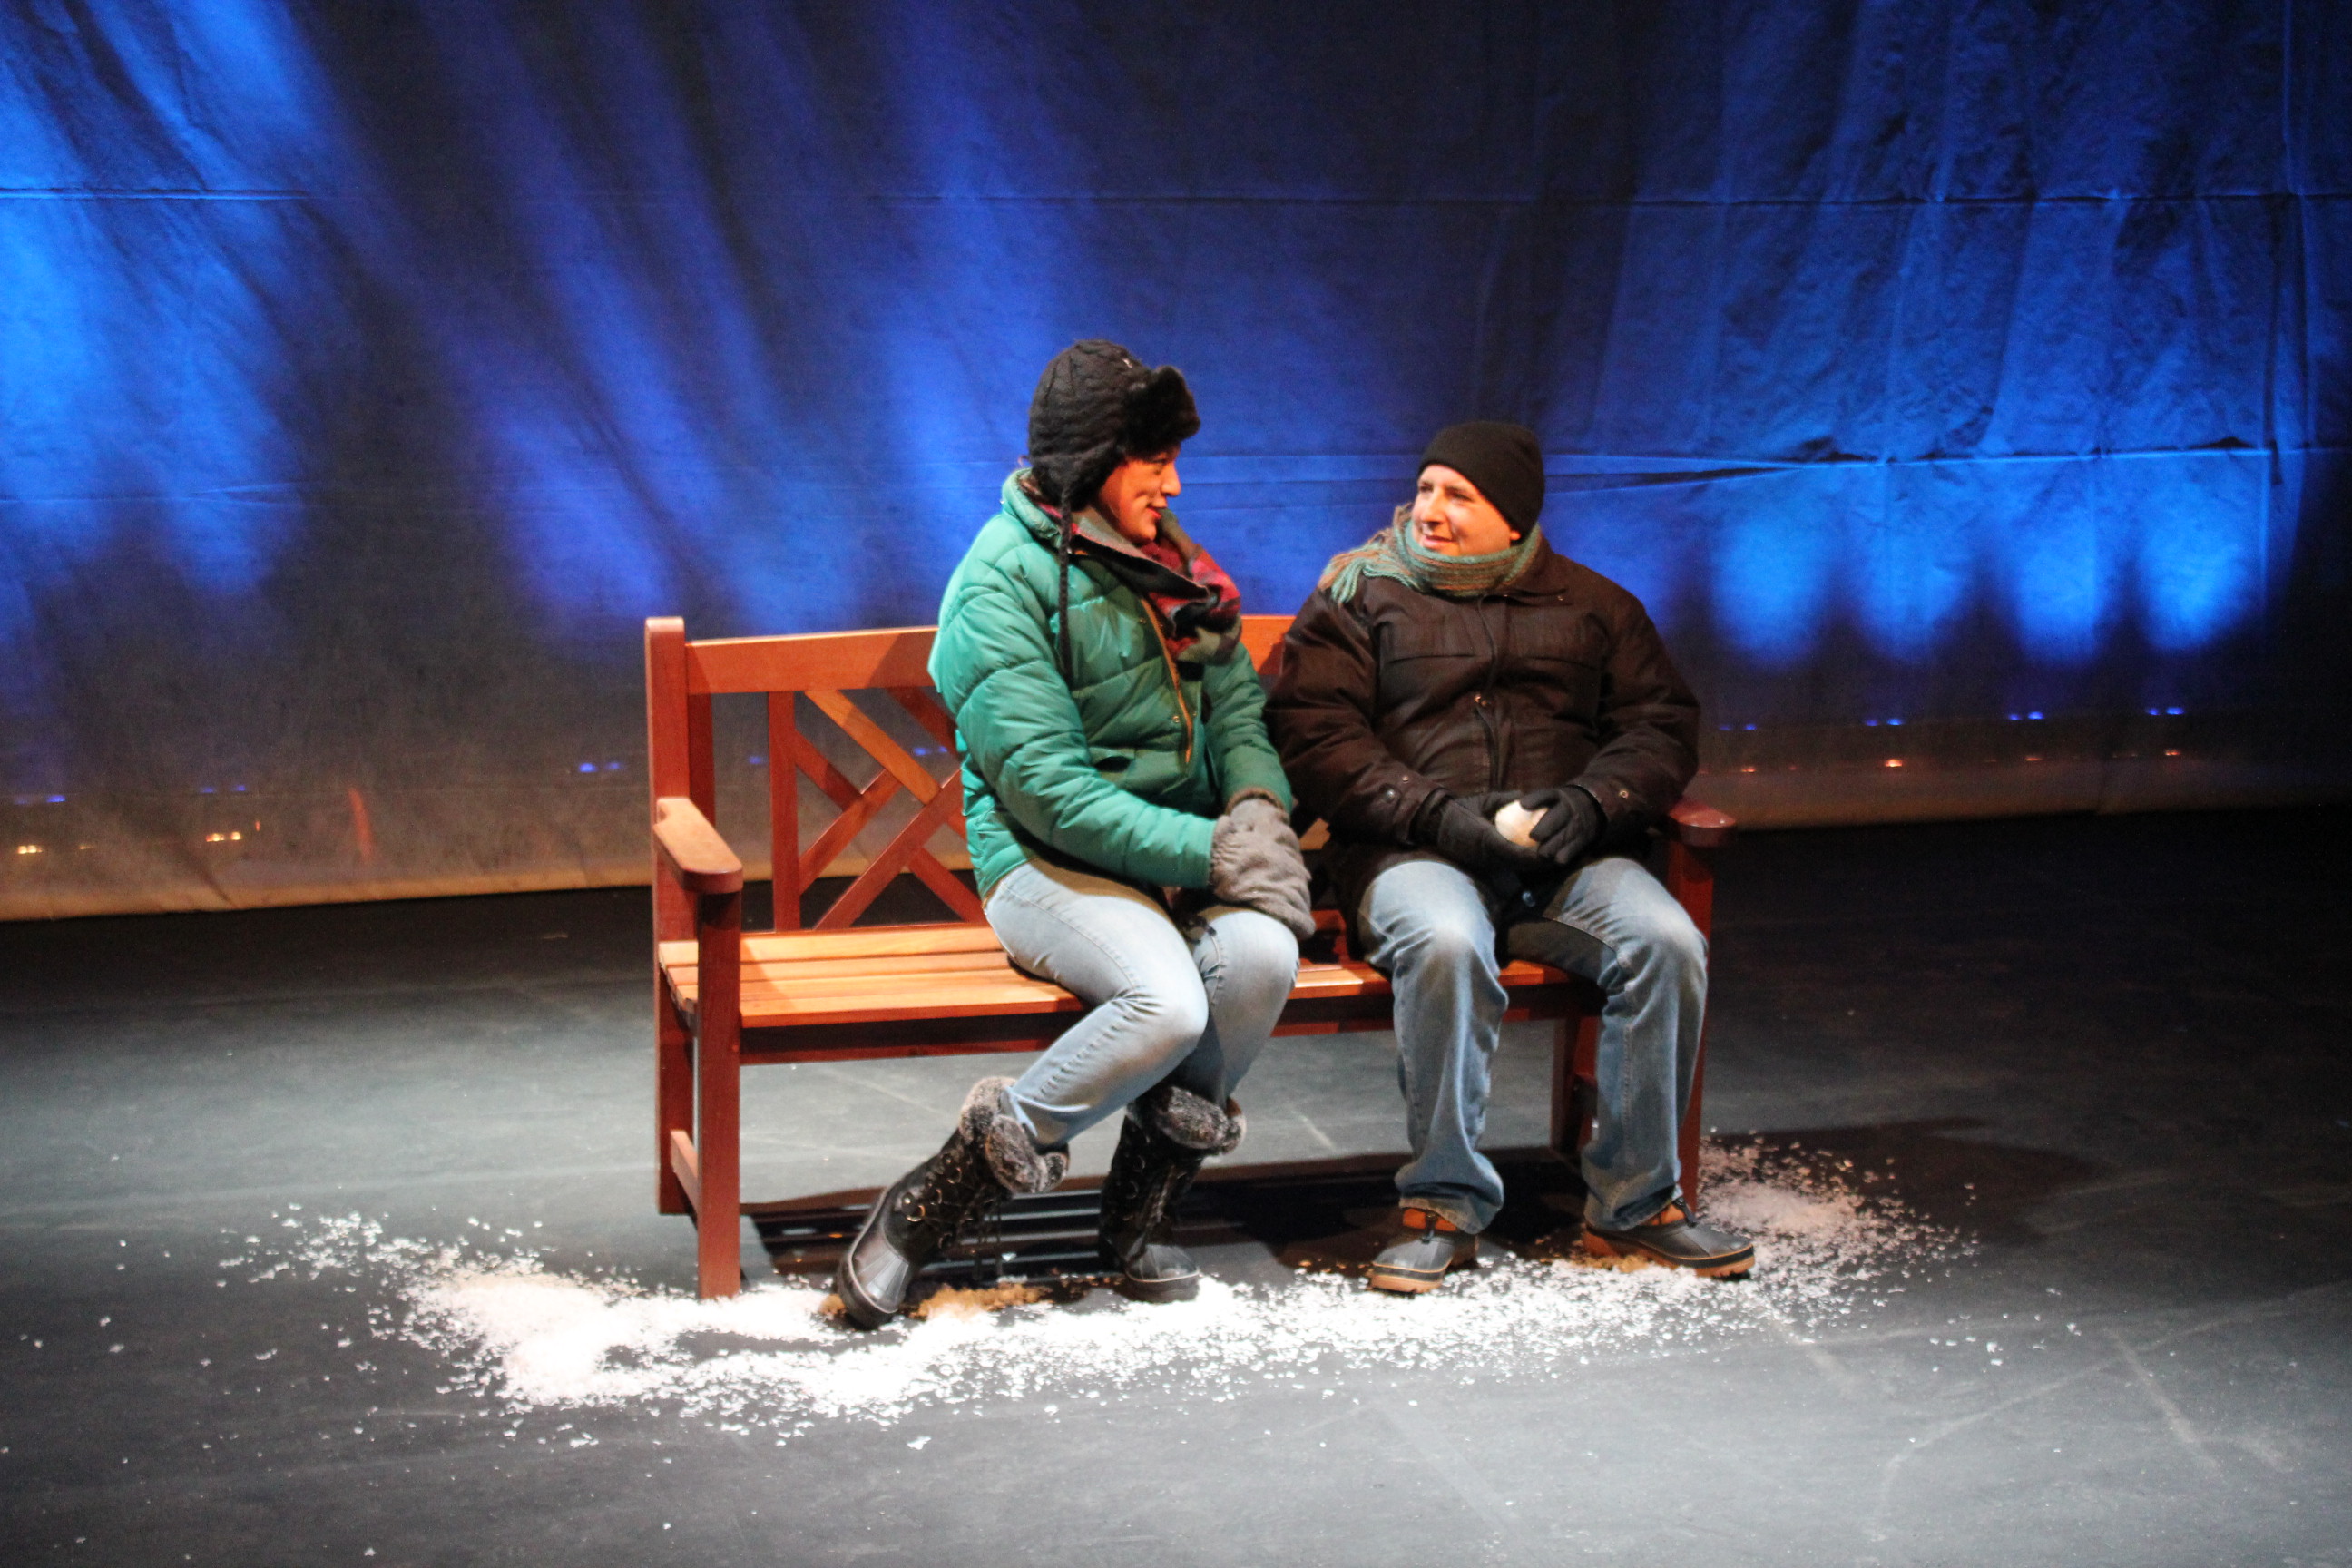 The Almost, Maine Review